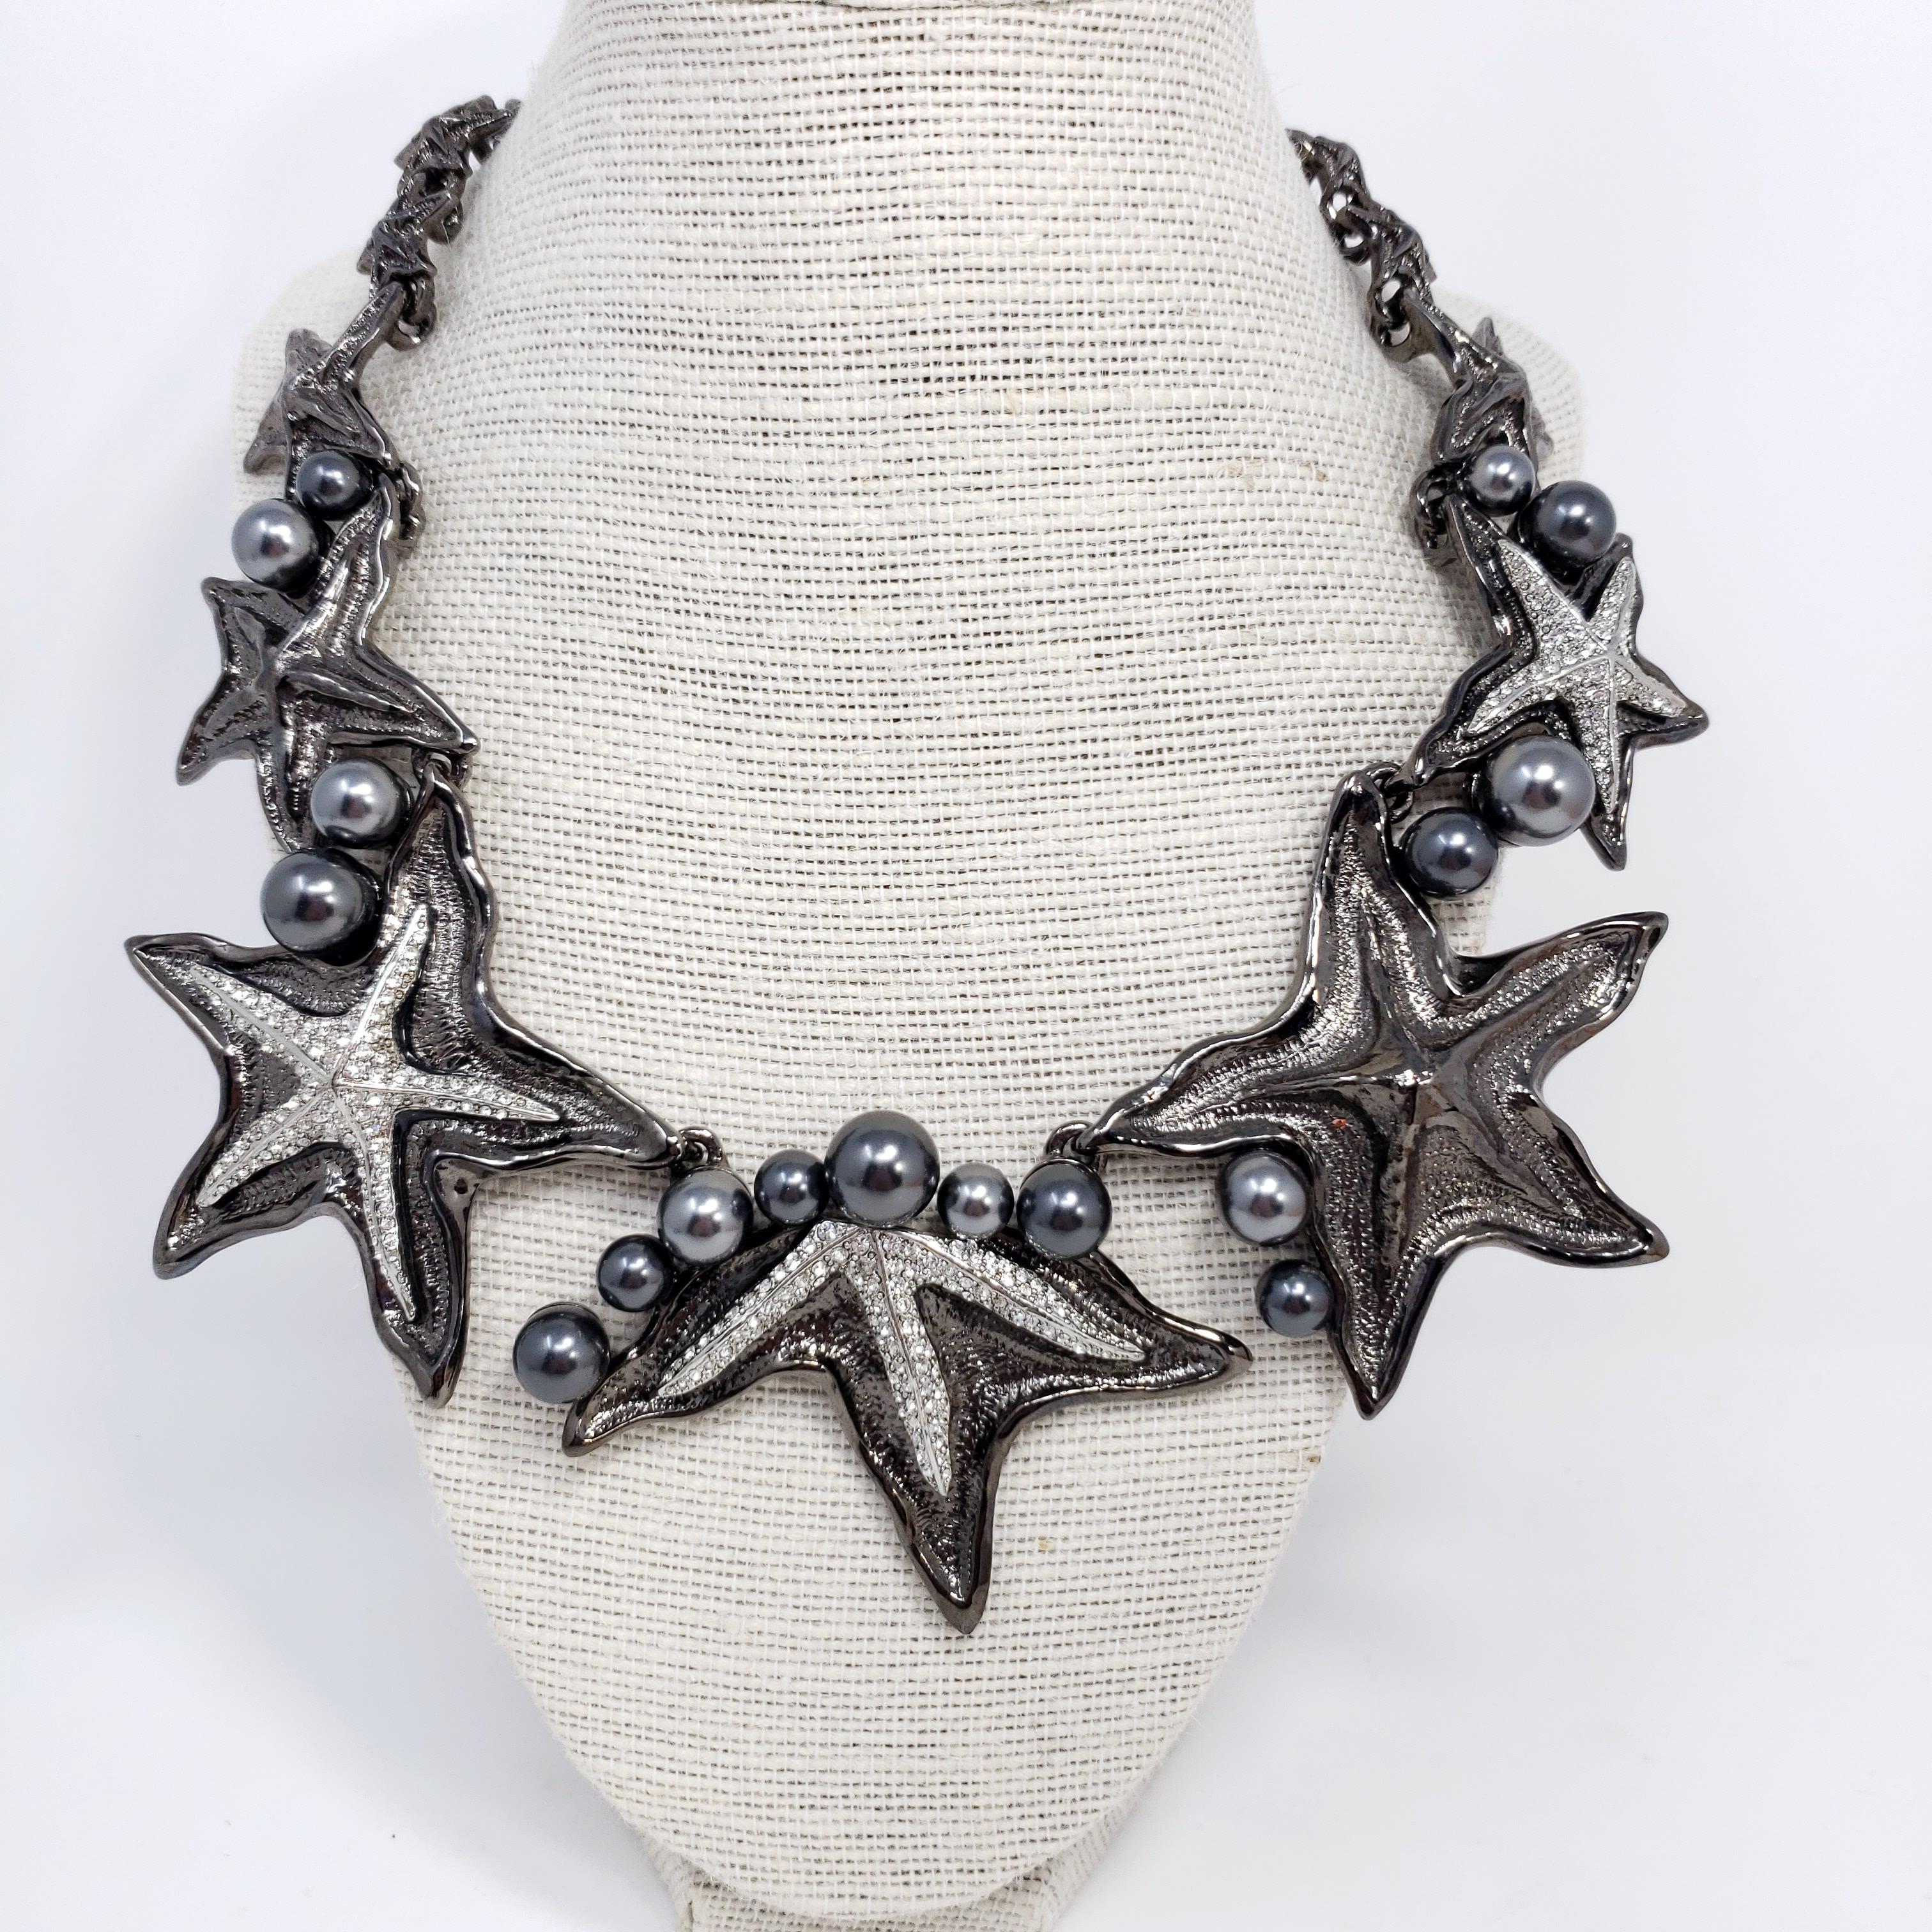 Inspired by marine life, Oscar de la Renta's collar link necklace is beautifully cast to resemble a collection of graduated starfish. This silver and dark gray gunmetal-tone piece is embellished with sparkling Swarovski pearls and crystals.